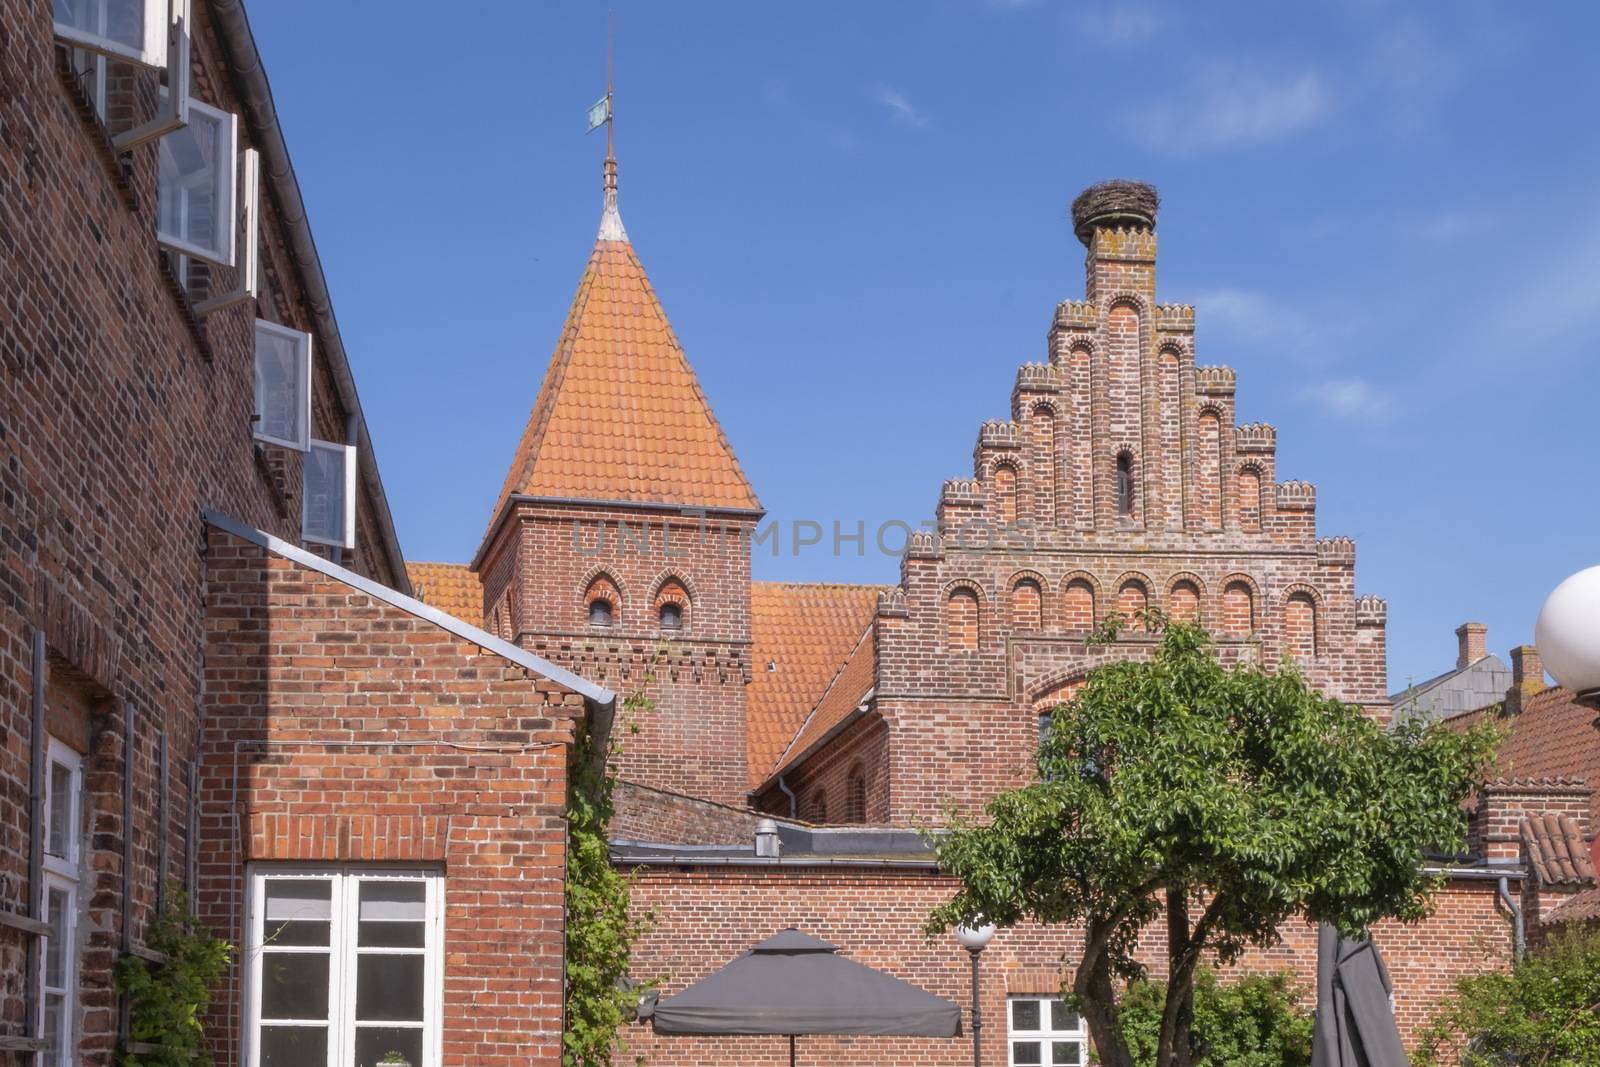 Houses in Ribe town, Denmark by Elenaphotos21